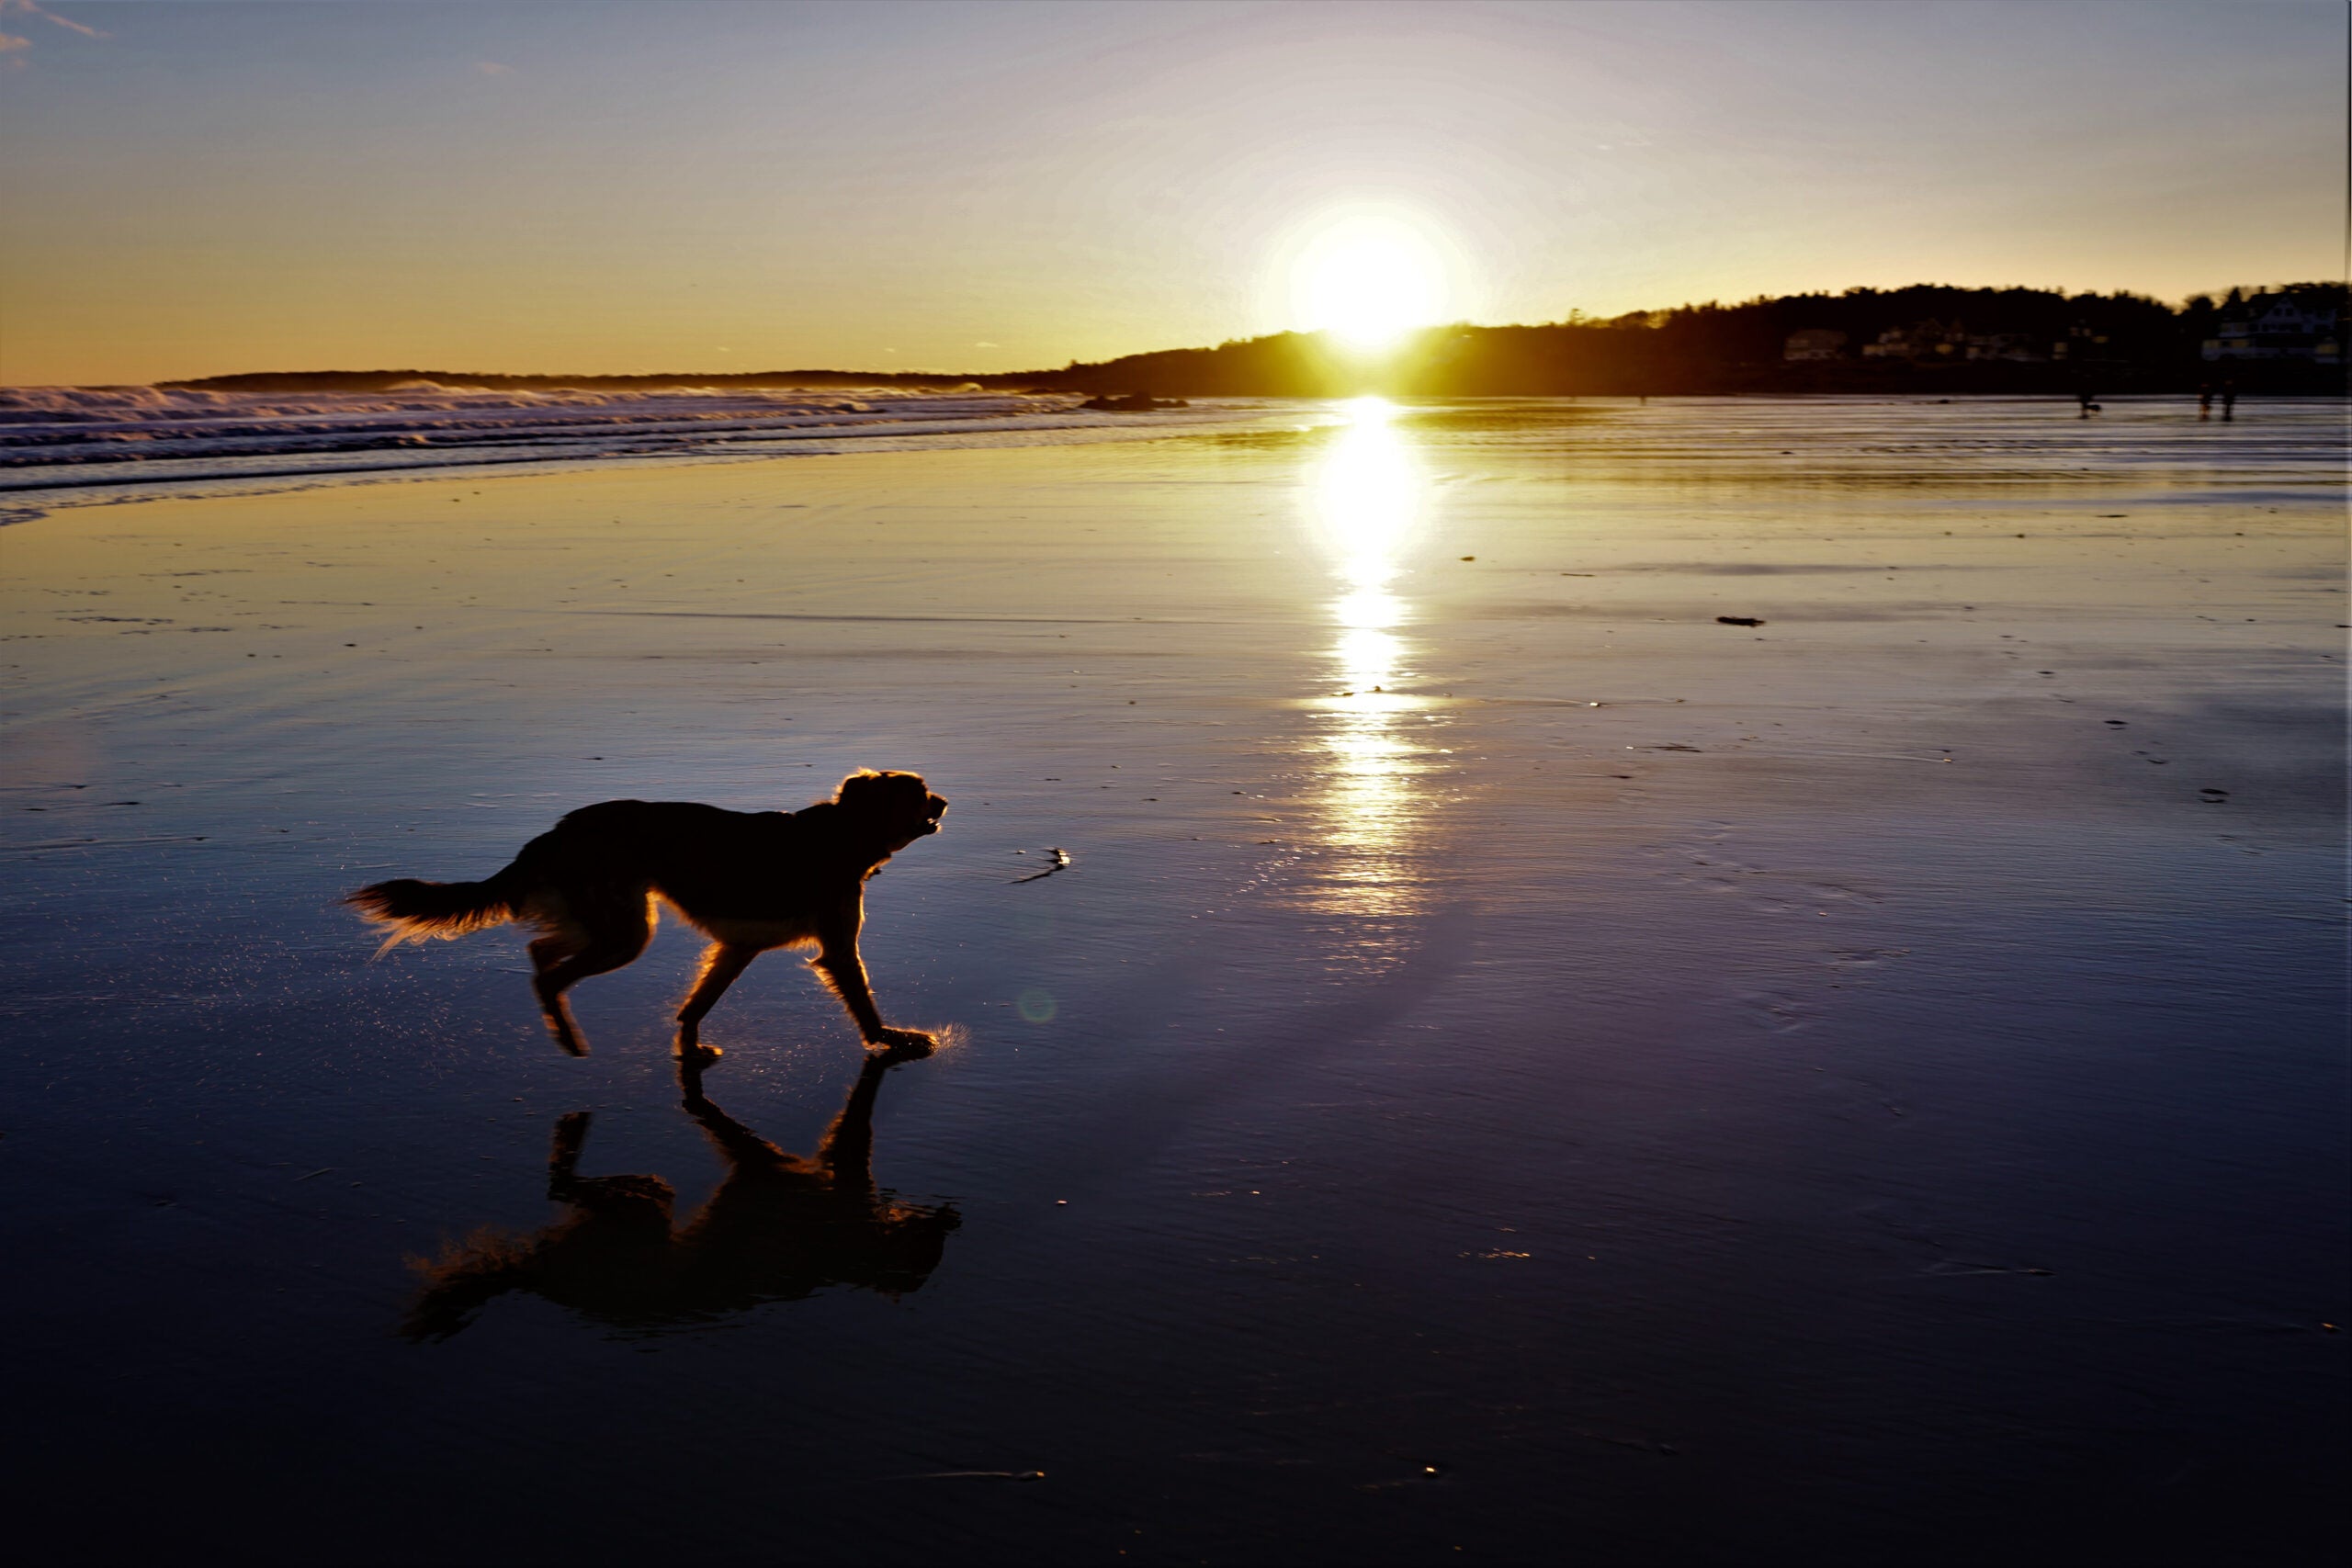 A photo of a dog on the beach at sunset.